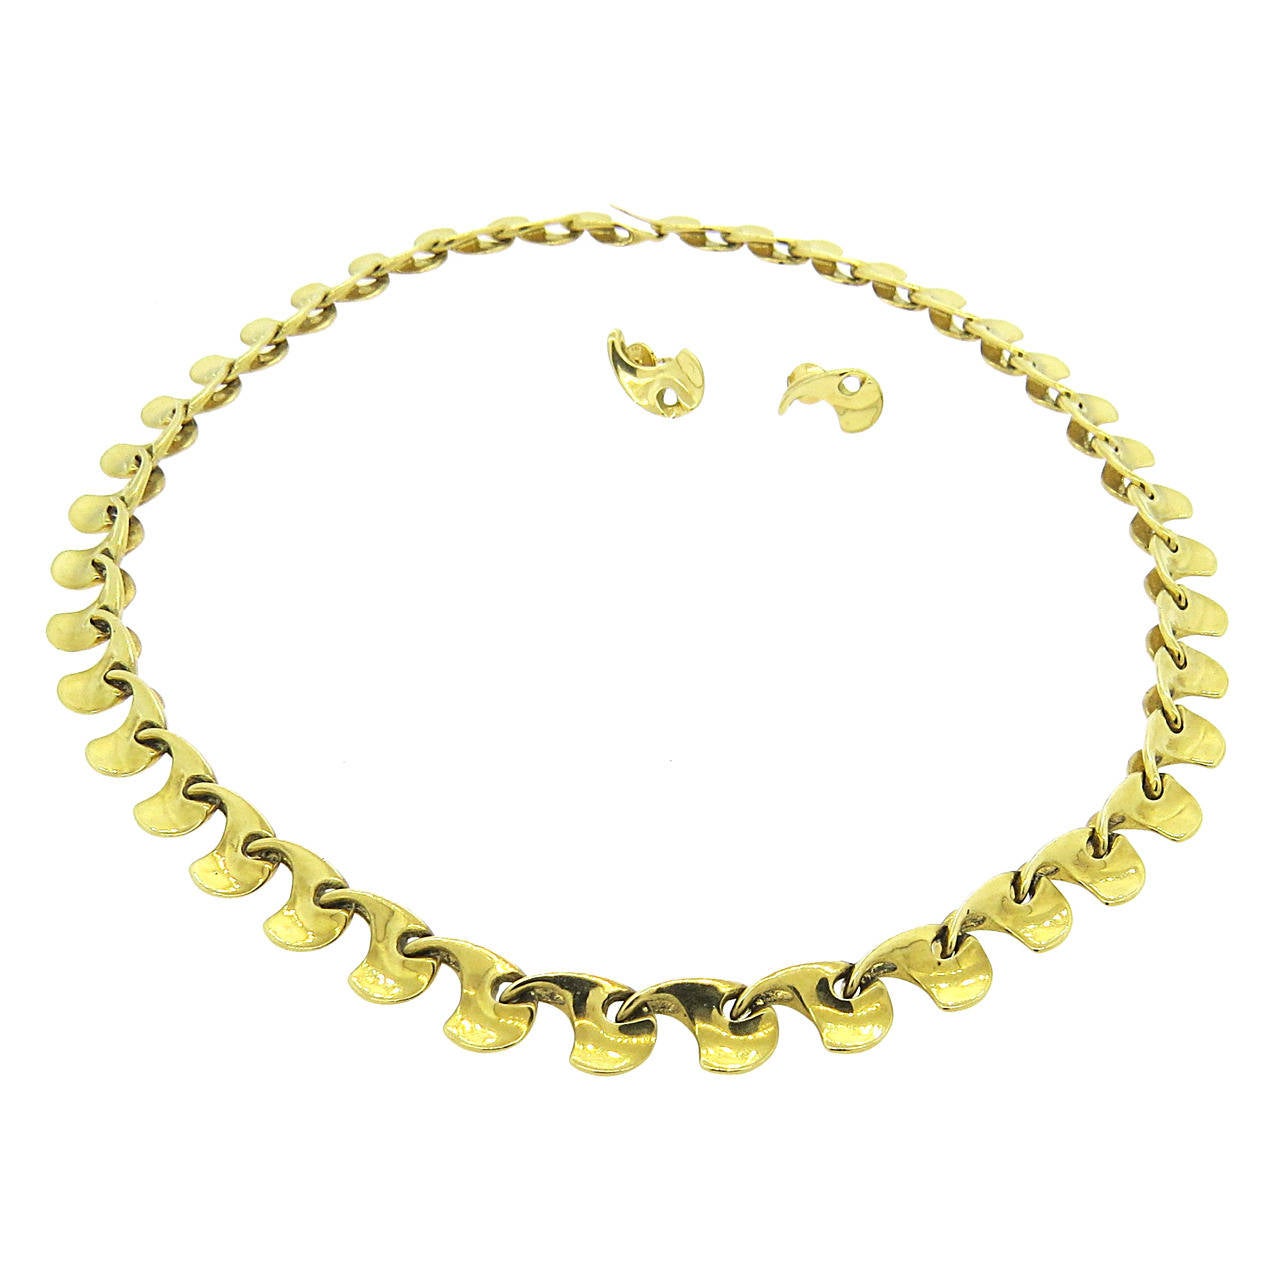 Modernist Gold Swirl Necklace and Earrings Set